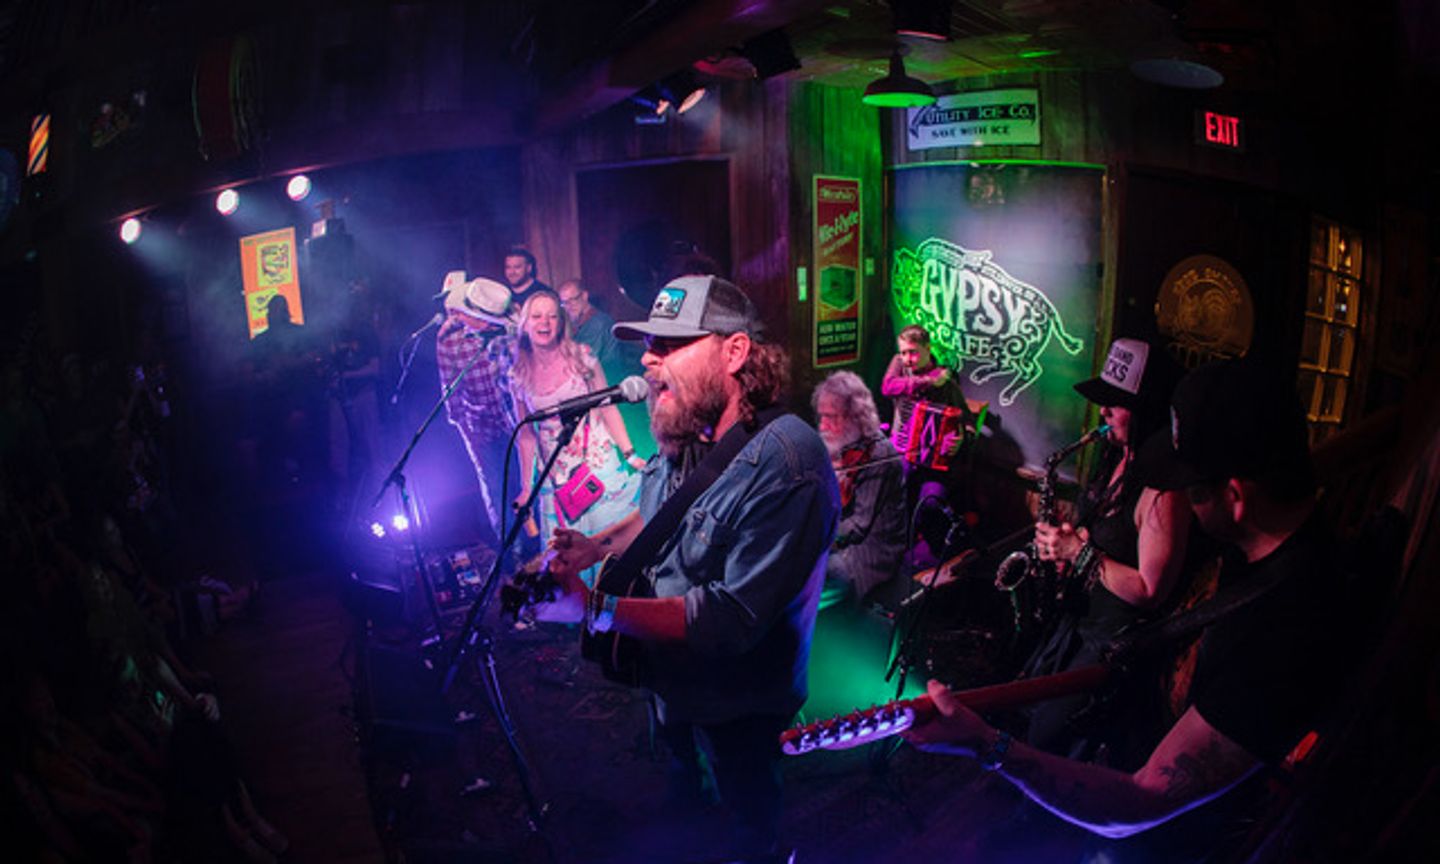 Chad Sullins delights Red Dirt music fans during a performance at Gypsy Cafe Music Festival